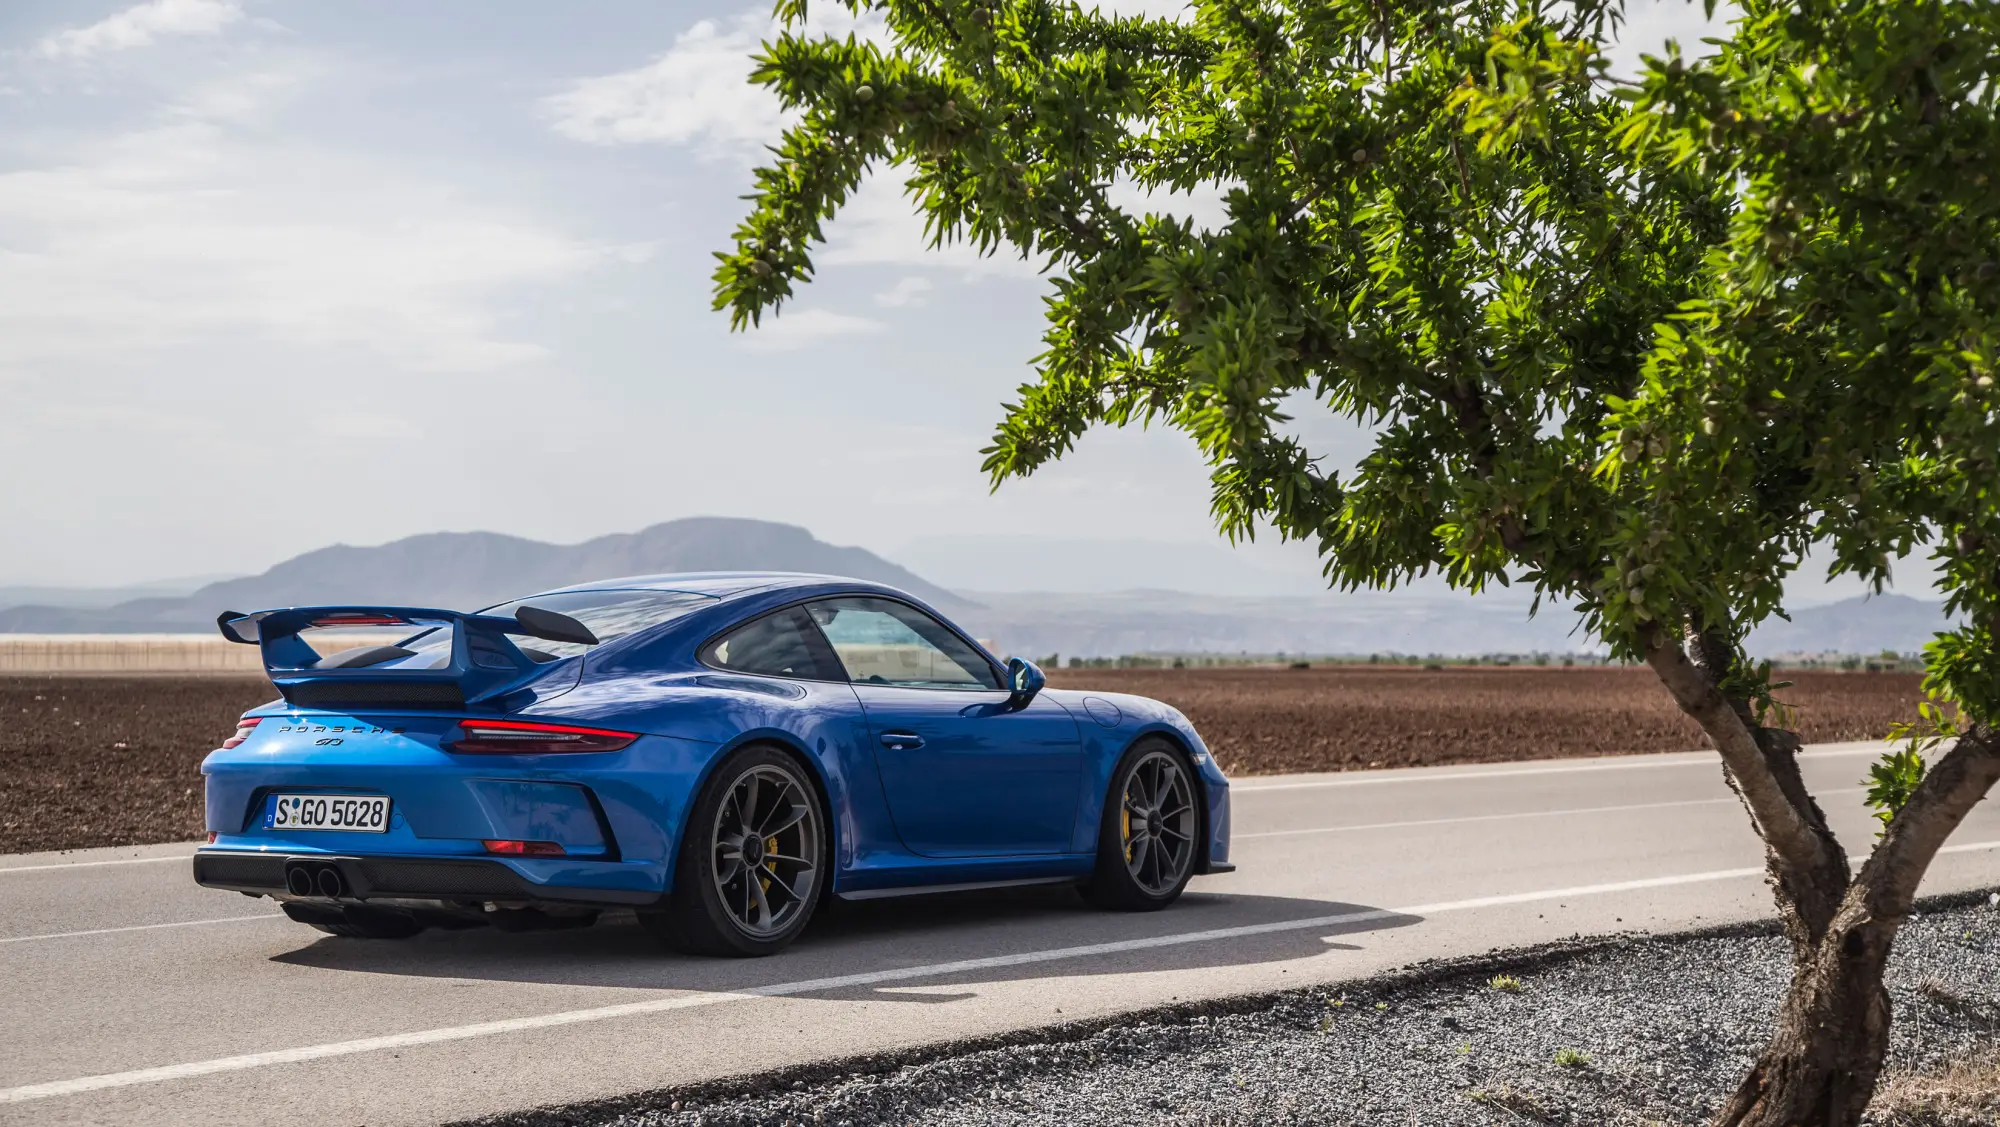 Porsche 911 GT3 MY 2018 - Andalusia - 10